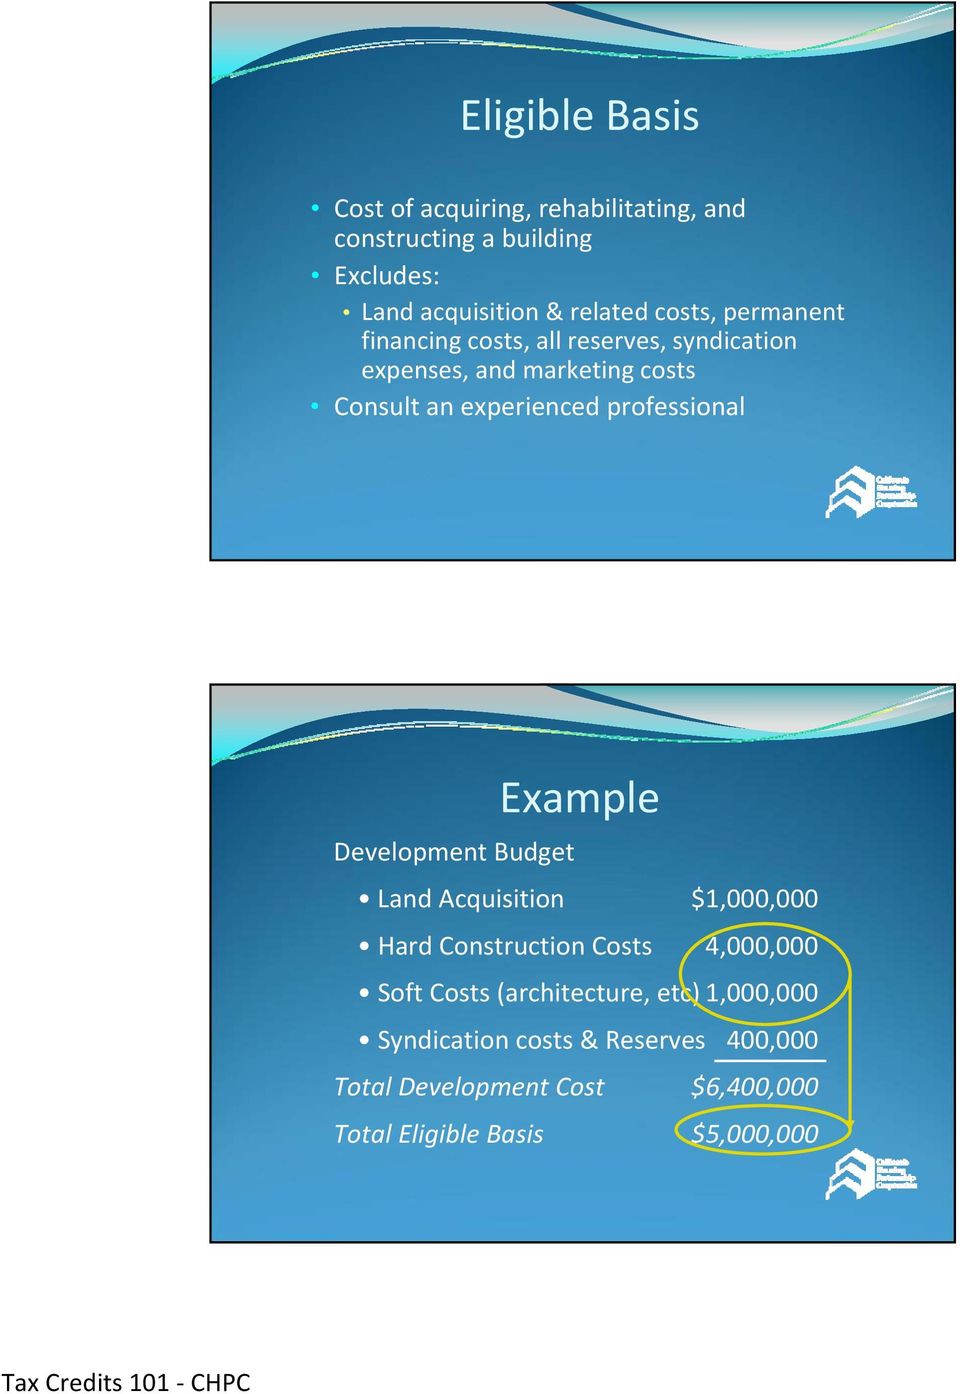 professional Example Development Budget Land Acquisition $1,000,000 Hard Construction Costs 4,000,000 Soft Costs